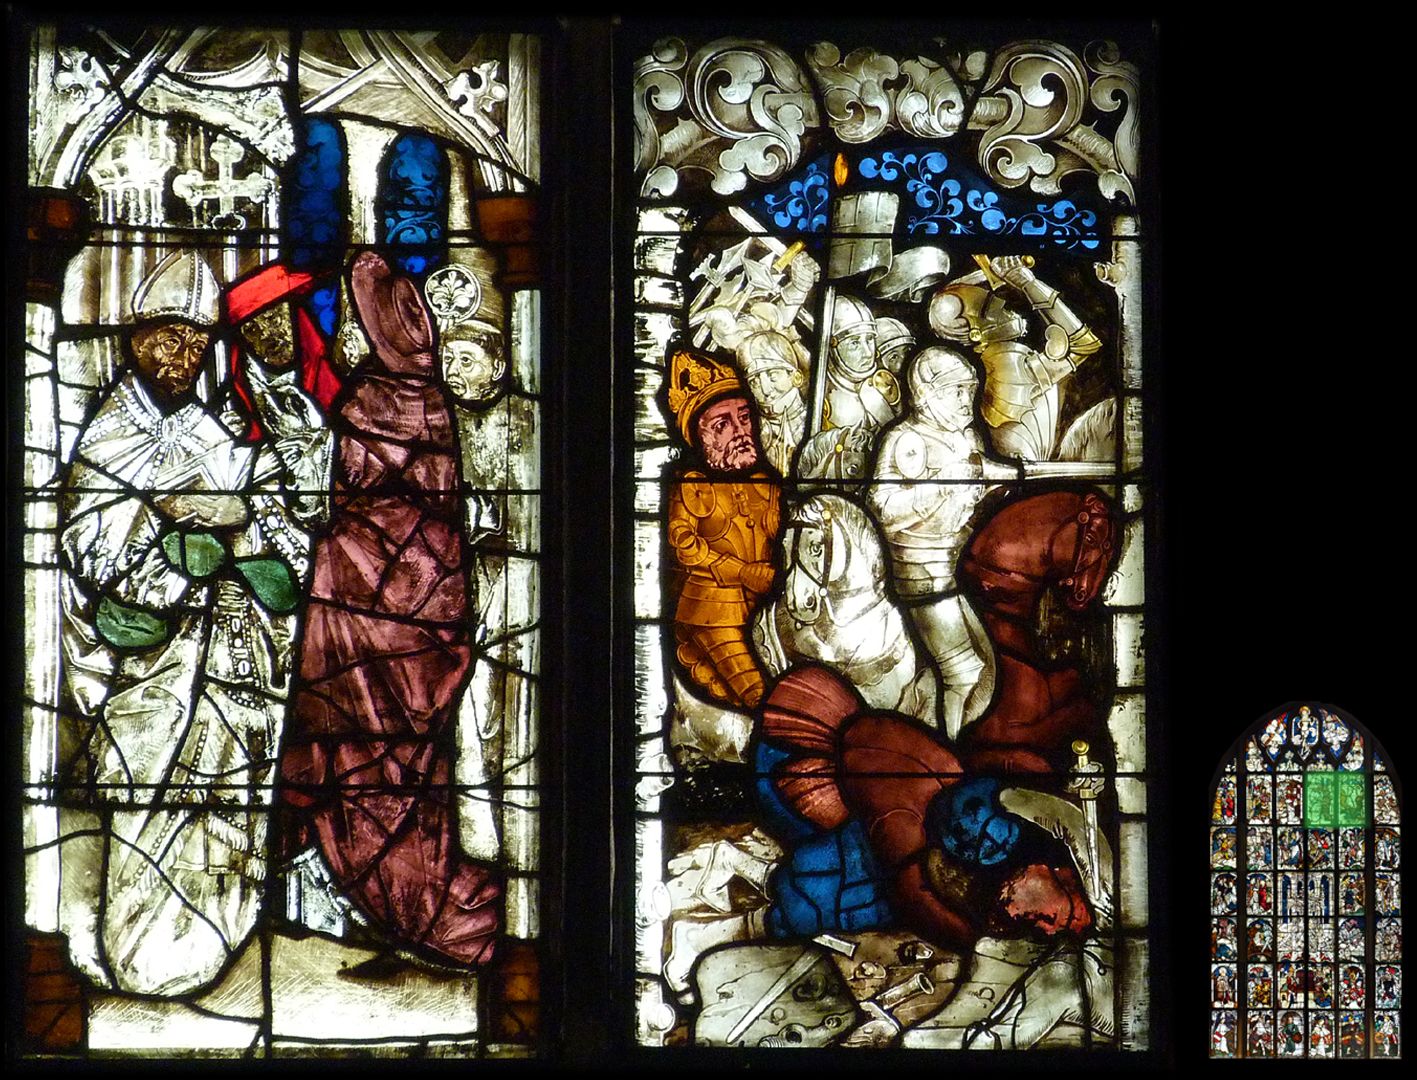 Imperial window On the left ecclesiastical dignitaries of the baptism scene, on the right victorious battle at the Milvian Bridge in 312